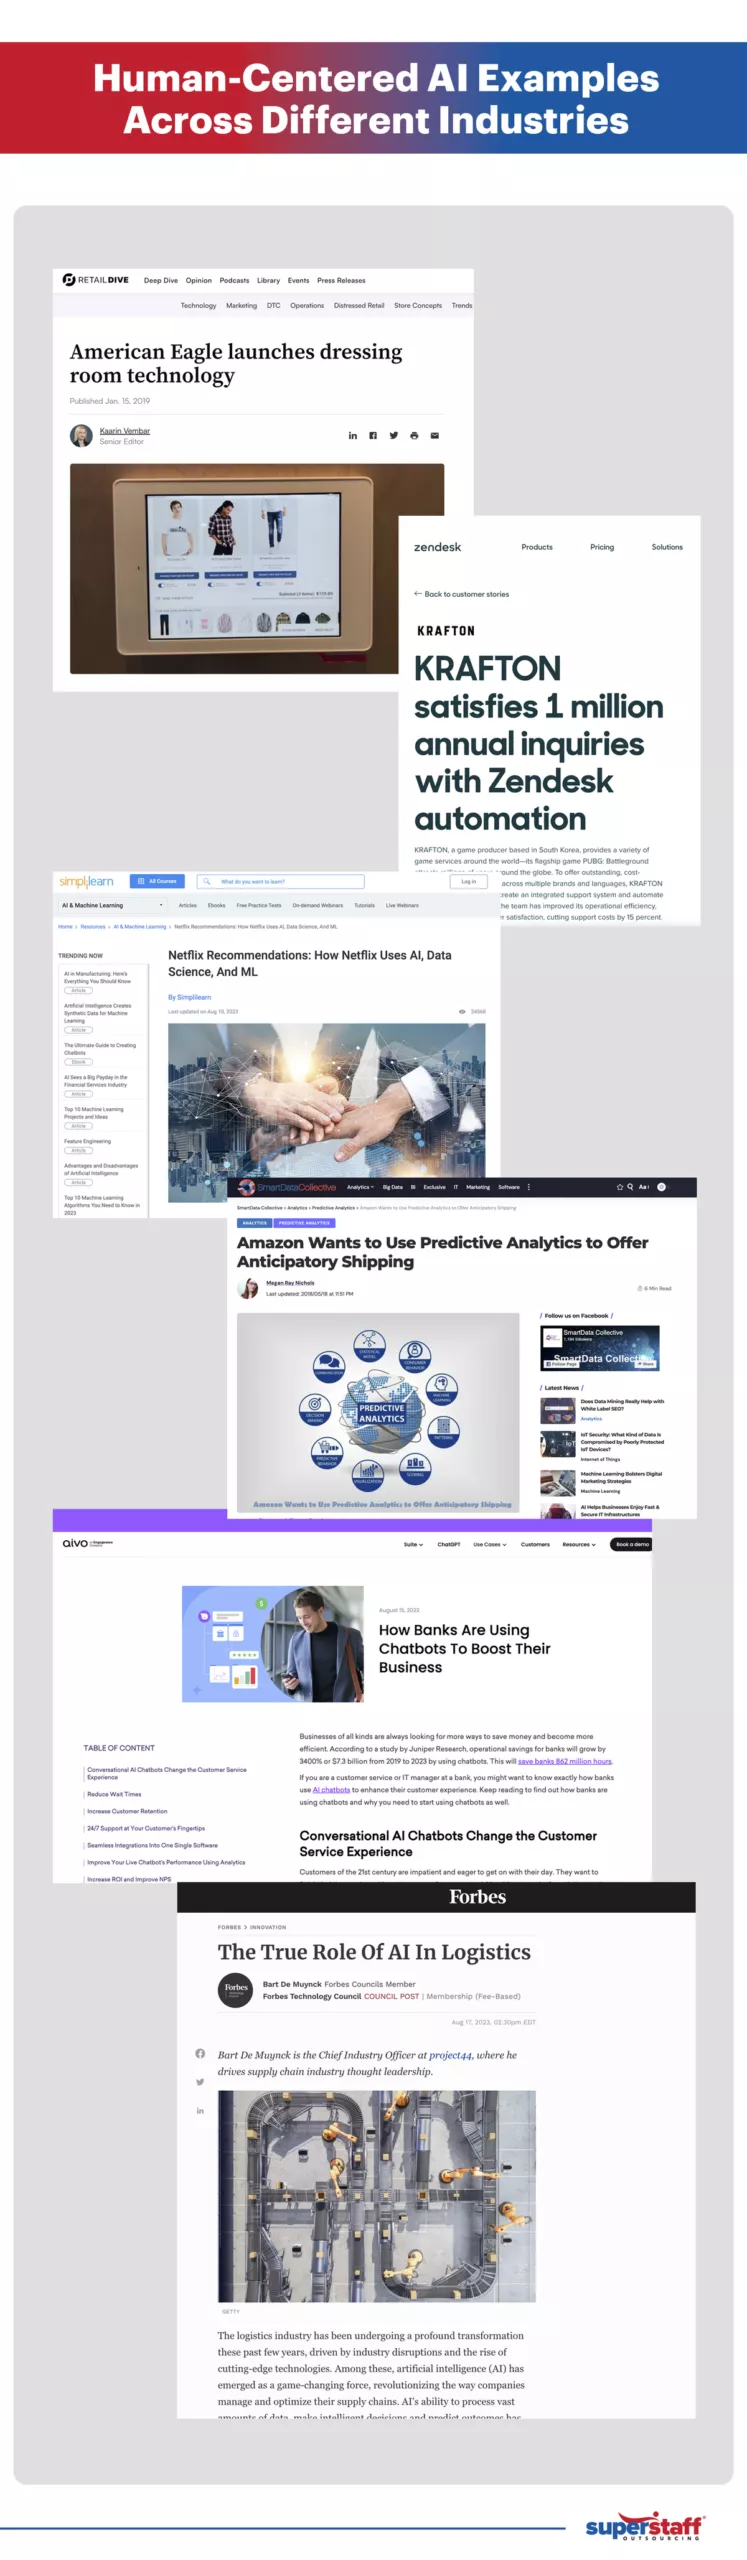 An infographic shows different headlines showing how industries are using human-centered AI.